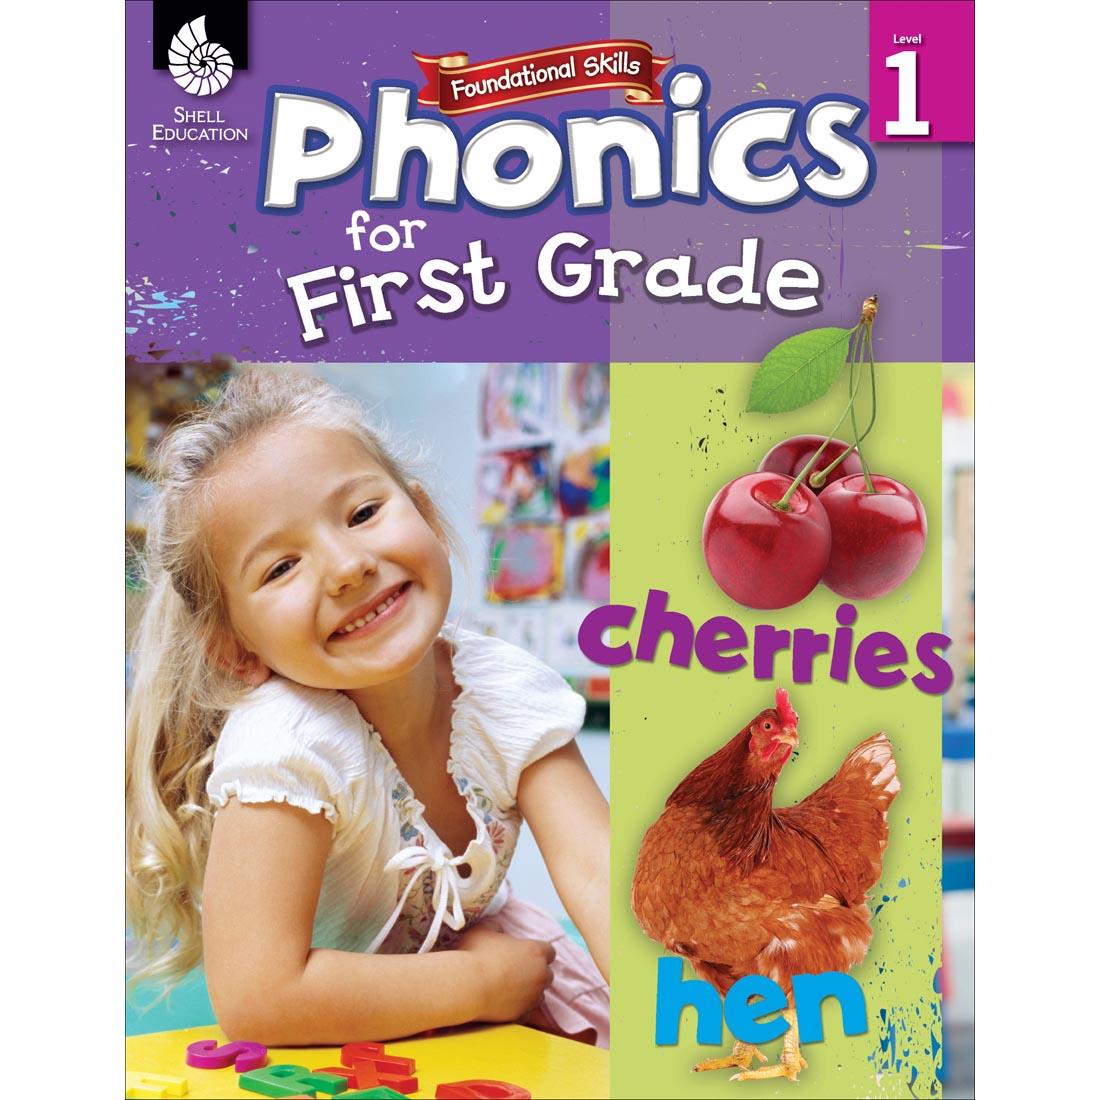 Foundational Skills Book Phonics for First Grade